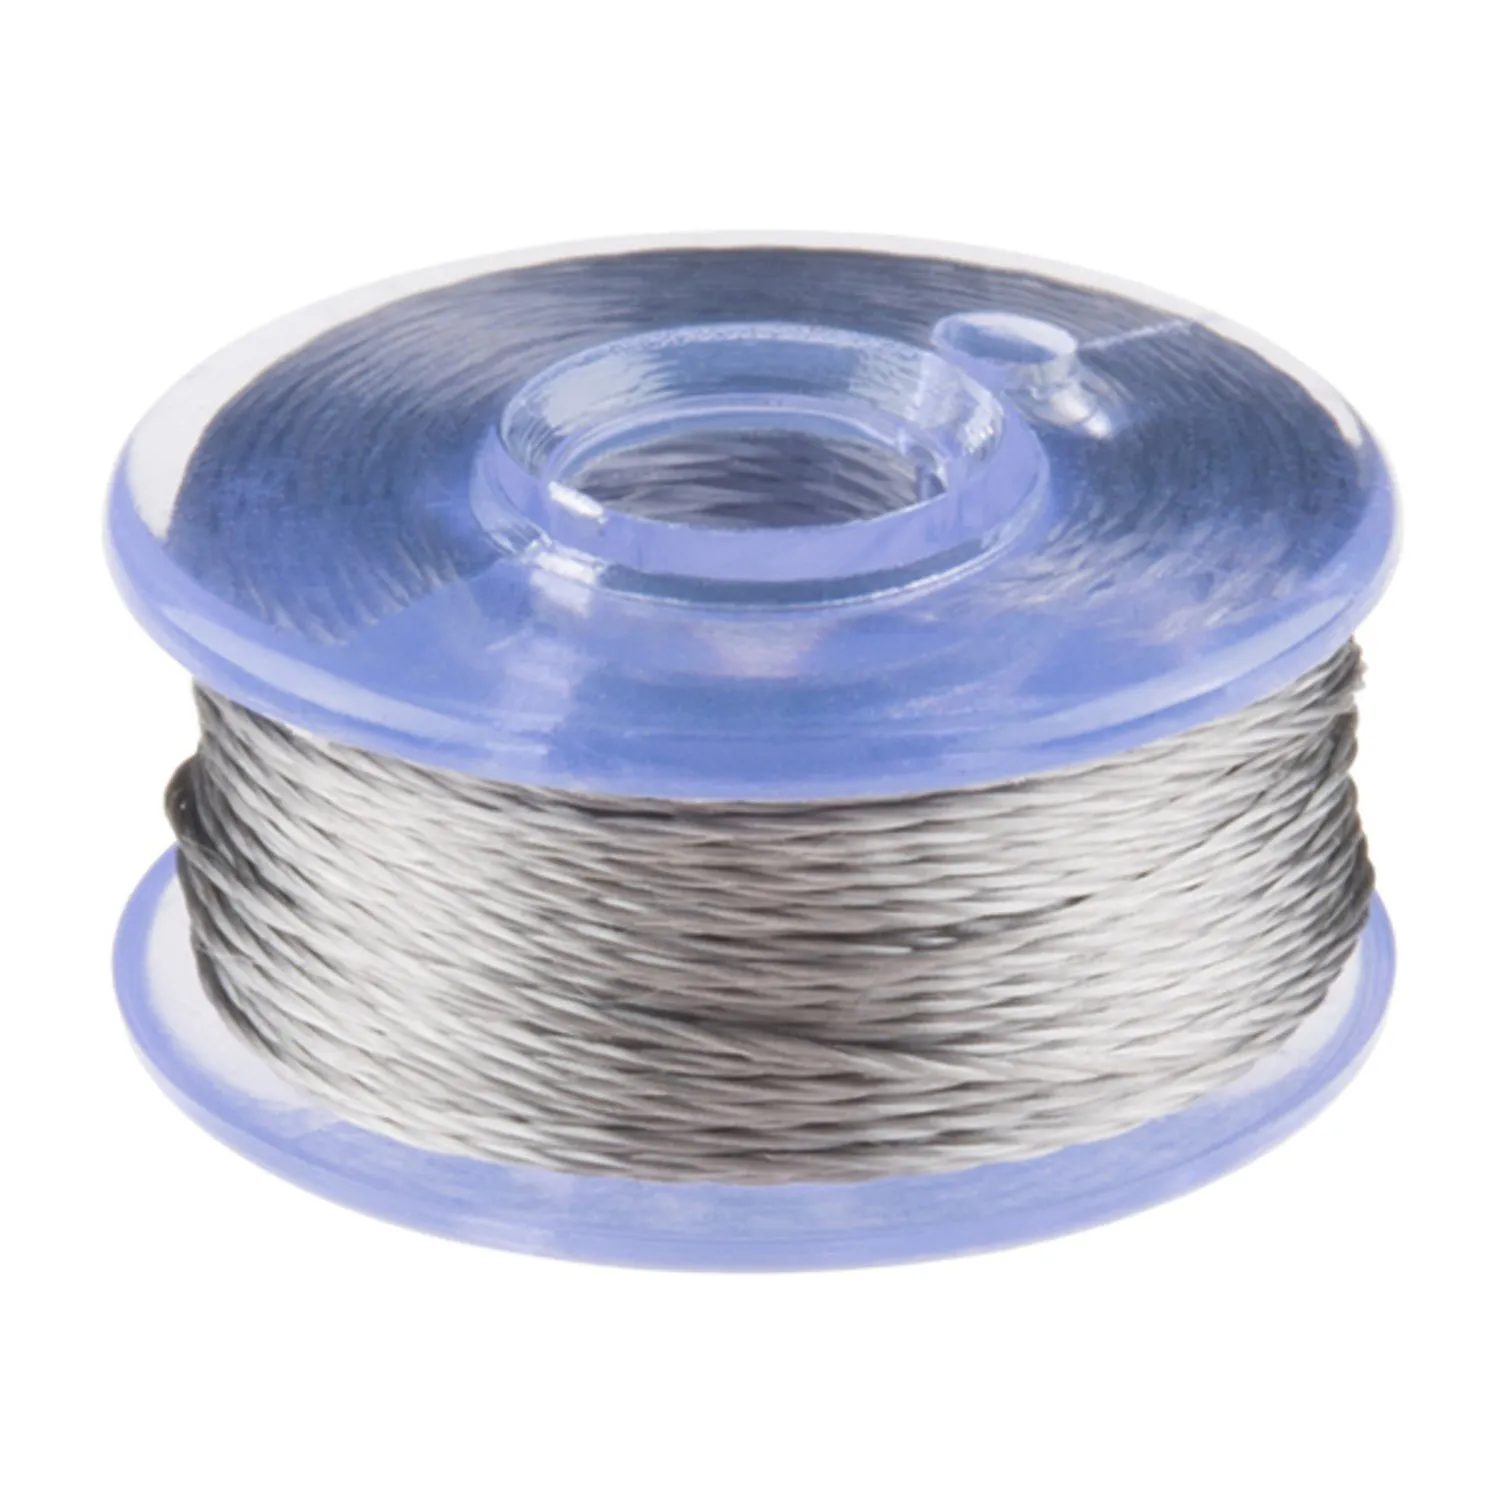 Photo of Conductive Thread Bobbin - 12m (Smooth, Stainless Steel)